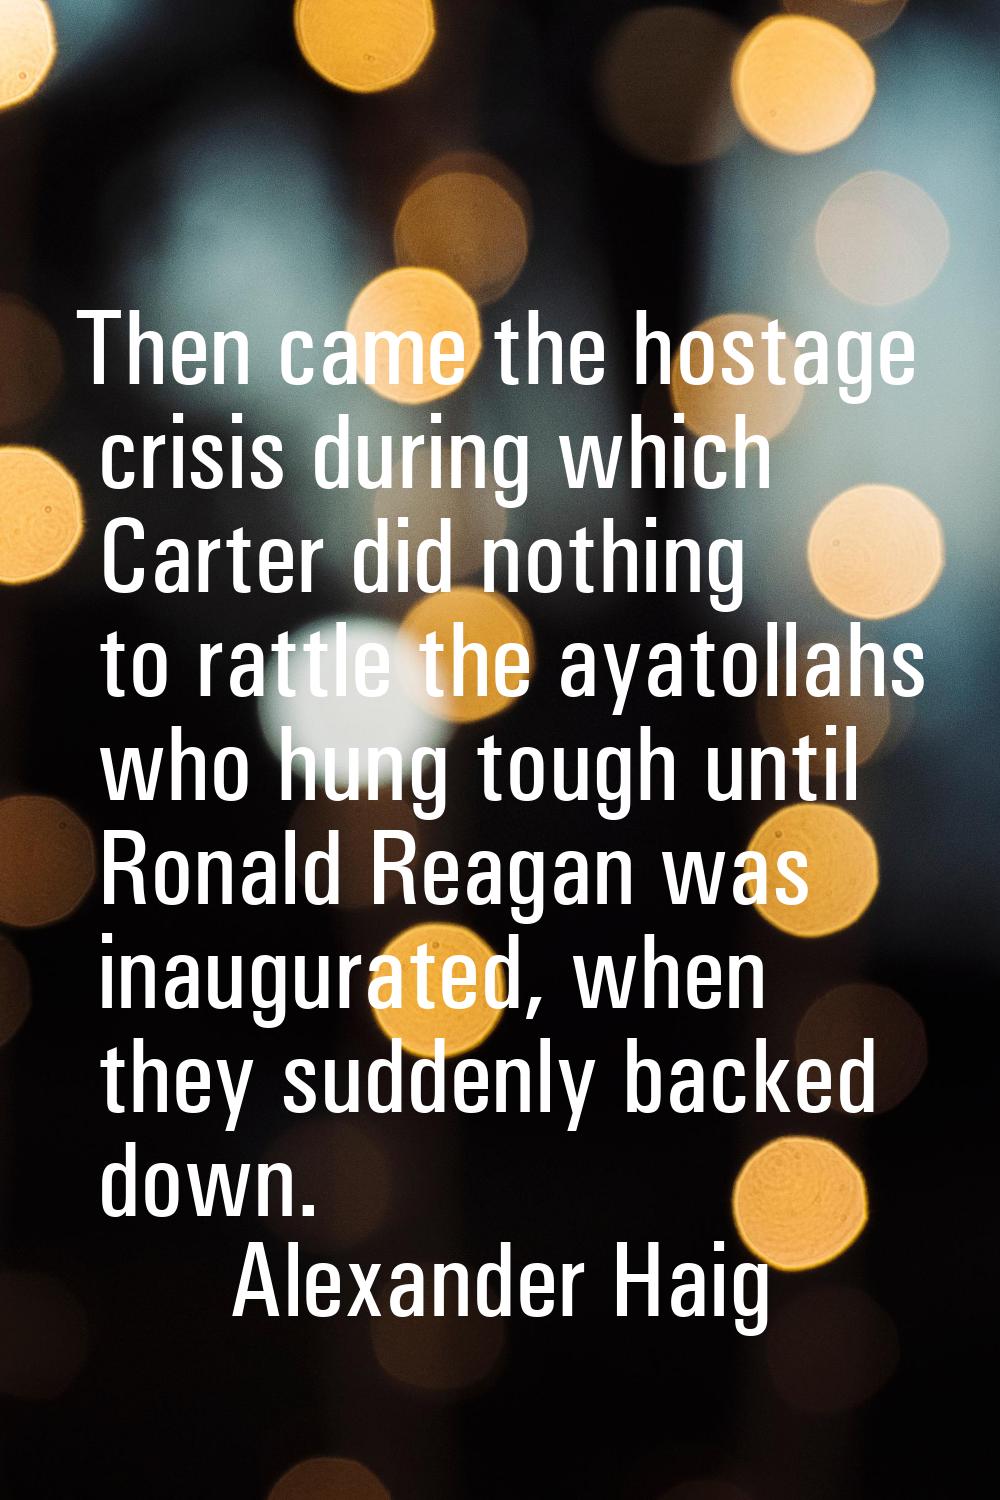 Then came the hostage crisis during which Carter did nothing to rattle the ayatollahs who hung toug